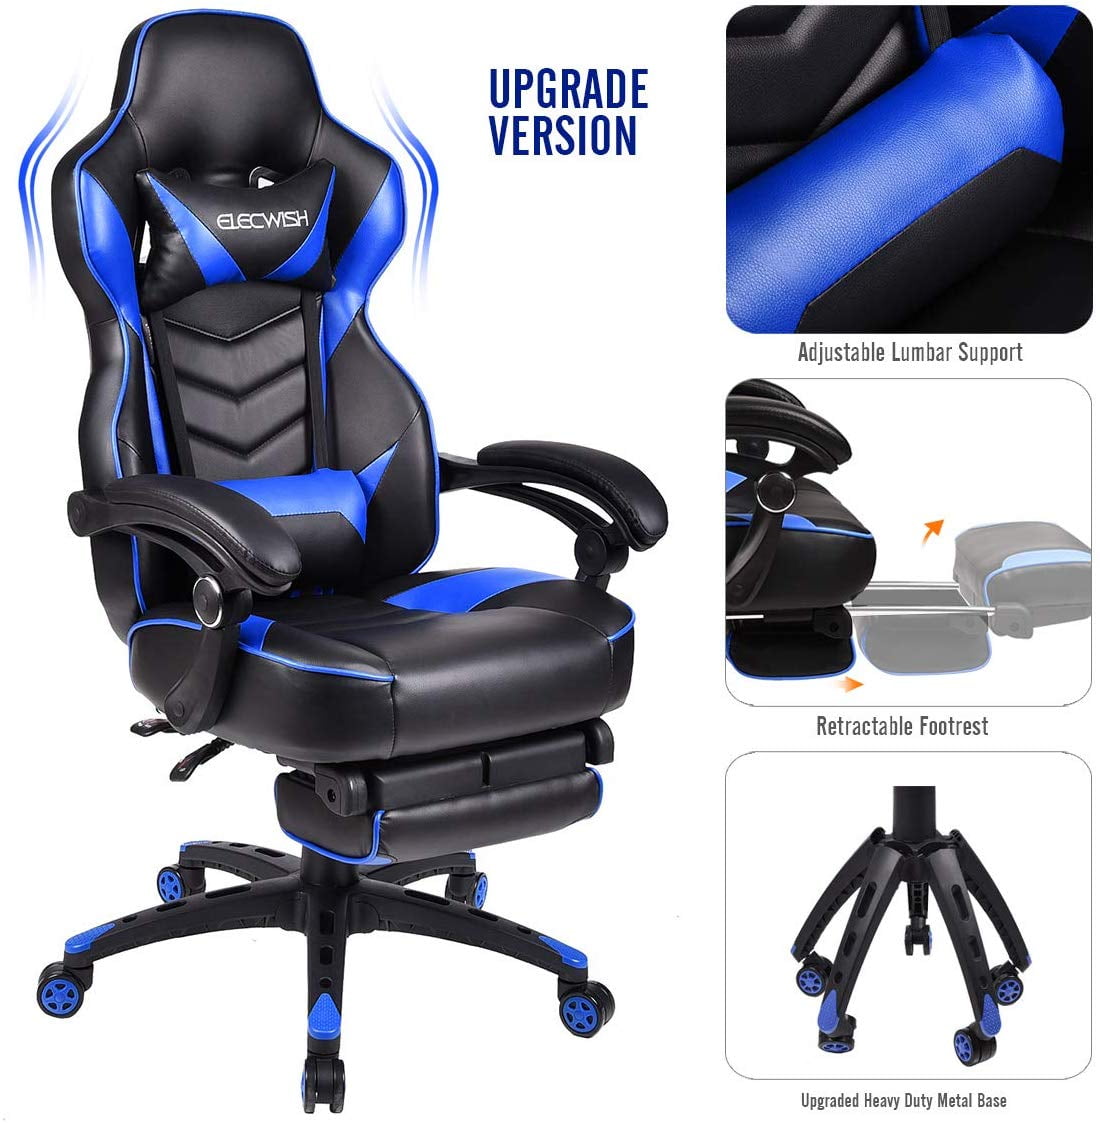 Black Large Size Gaming Chair High-Back PC Racing Chair Headrest Lumbar Massager Cushion Ergonomic Swivel PC Racing Chair with Retractable Footrest,PU Leather Executive Home Computer Chair 